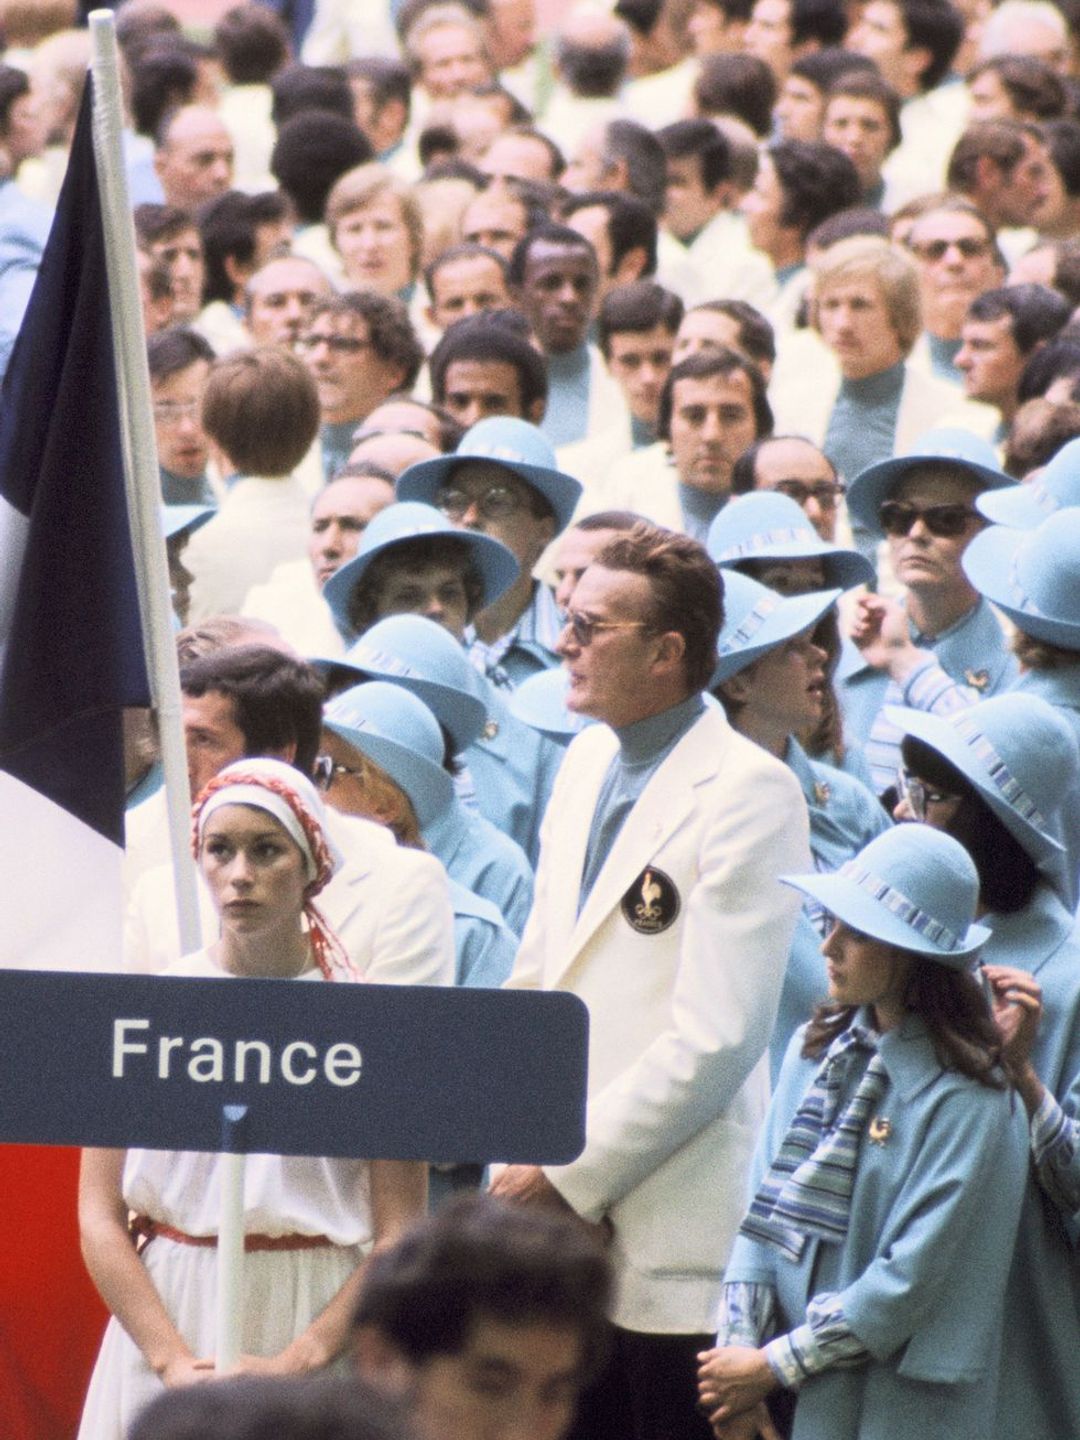 The French Olympic Team in their uniforms for the 1976 games